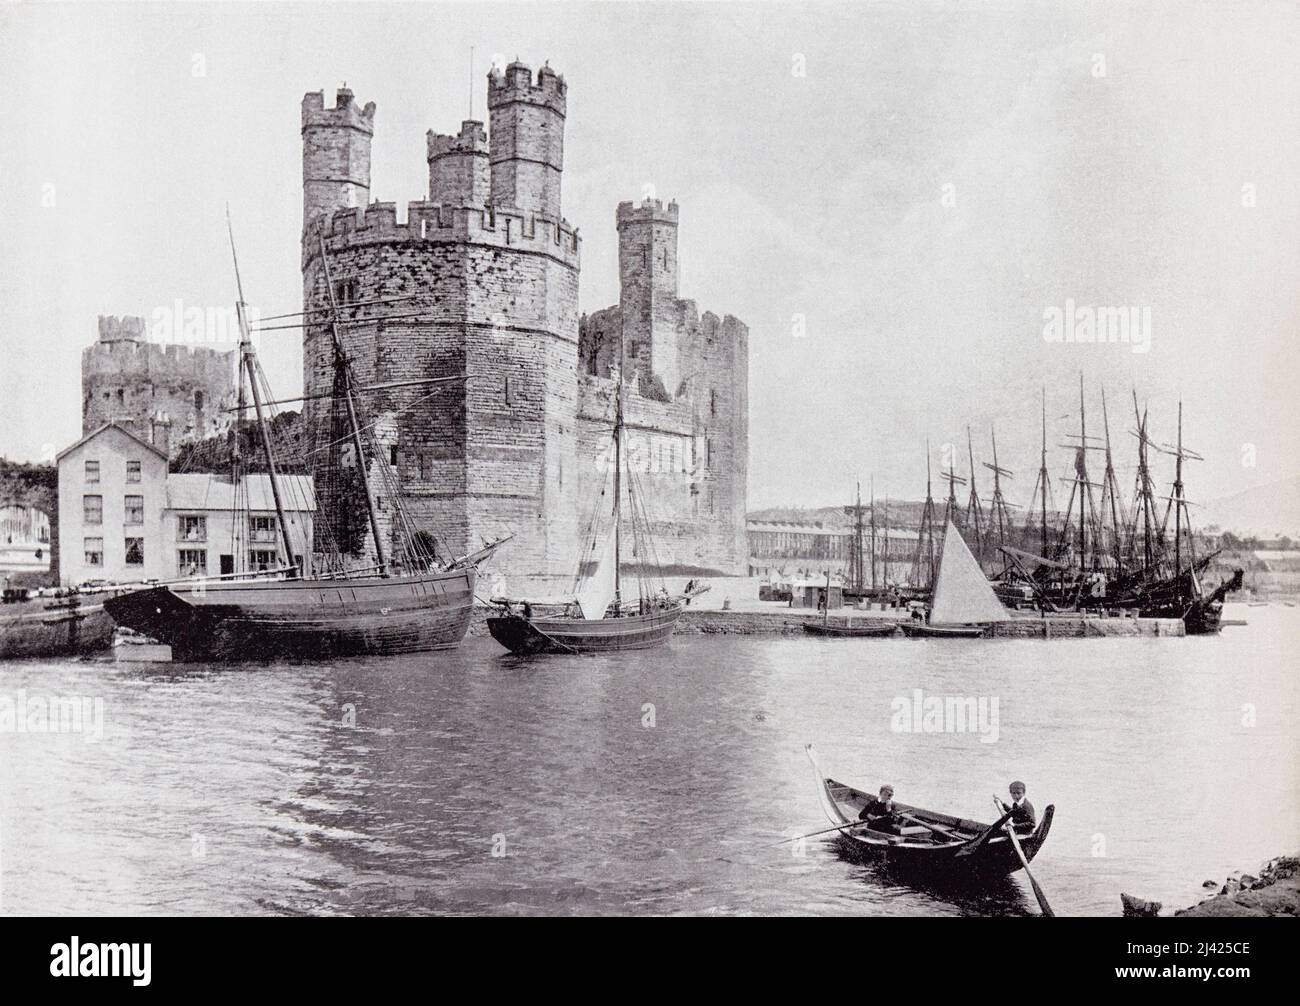 Caernarfon Castle, aka Carnarvon Castle or Caernarvon Castle, Caernarfon, Gwynedd, north-west Wales, seen from across the River Seiont in the 19th century.  From Around The Coast,  An Album of Pictures from Photographs of the Chief Seaside Places of Interest in Great Britain and Ireland published London, 1895, by George Newnes Limited. Stock Photo